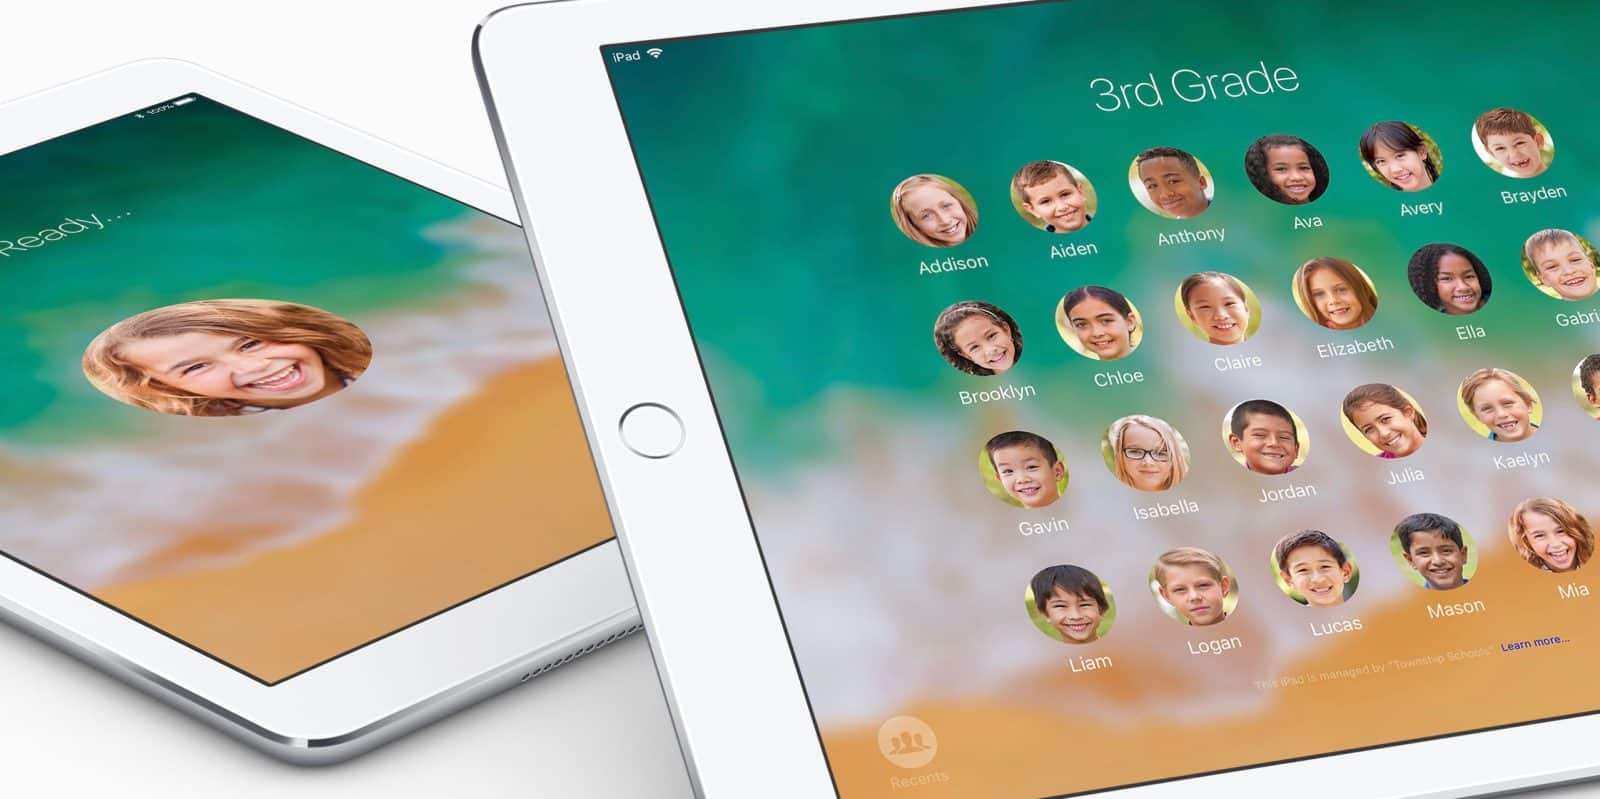 bloomberg said apple may release new low cost ipad next week 00